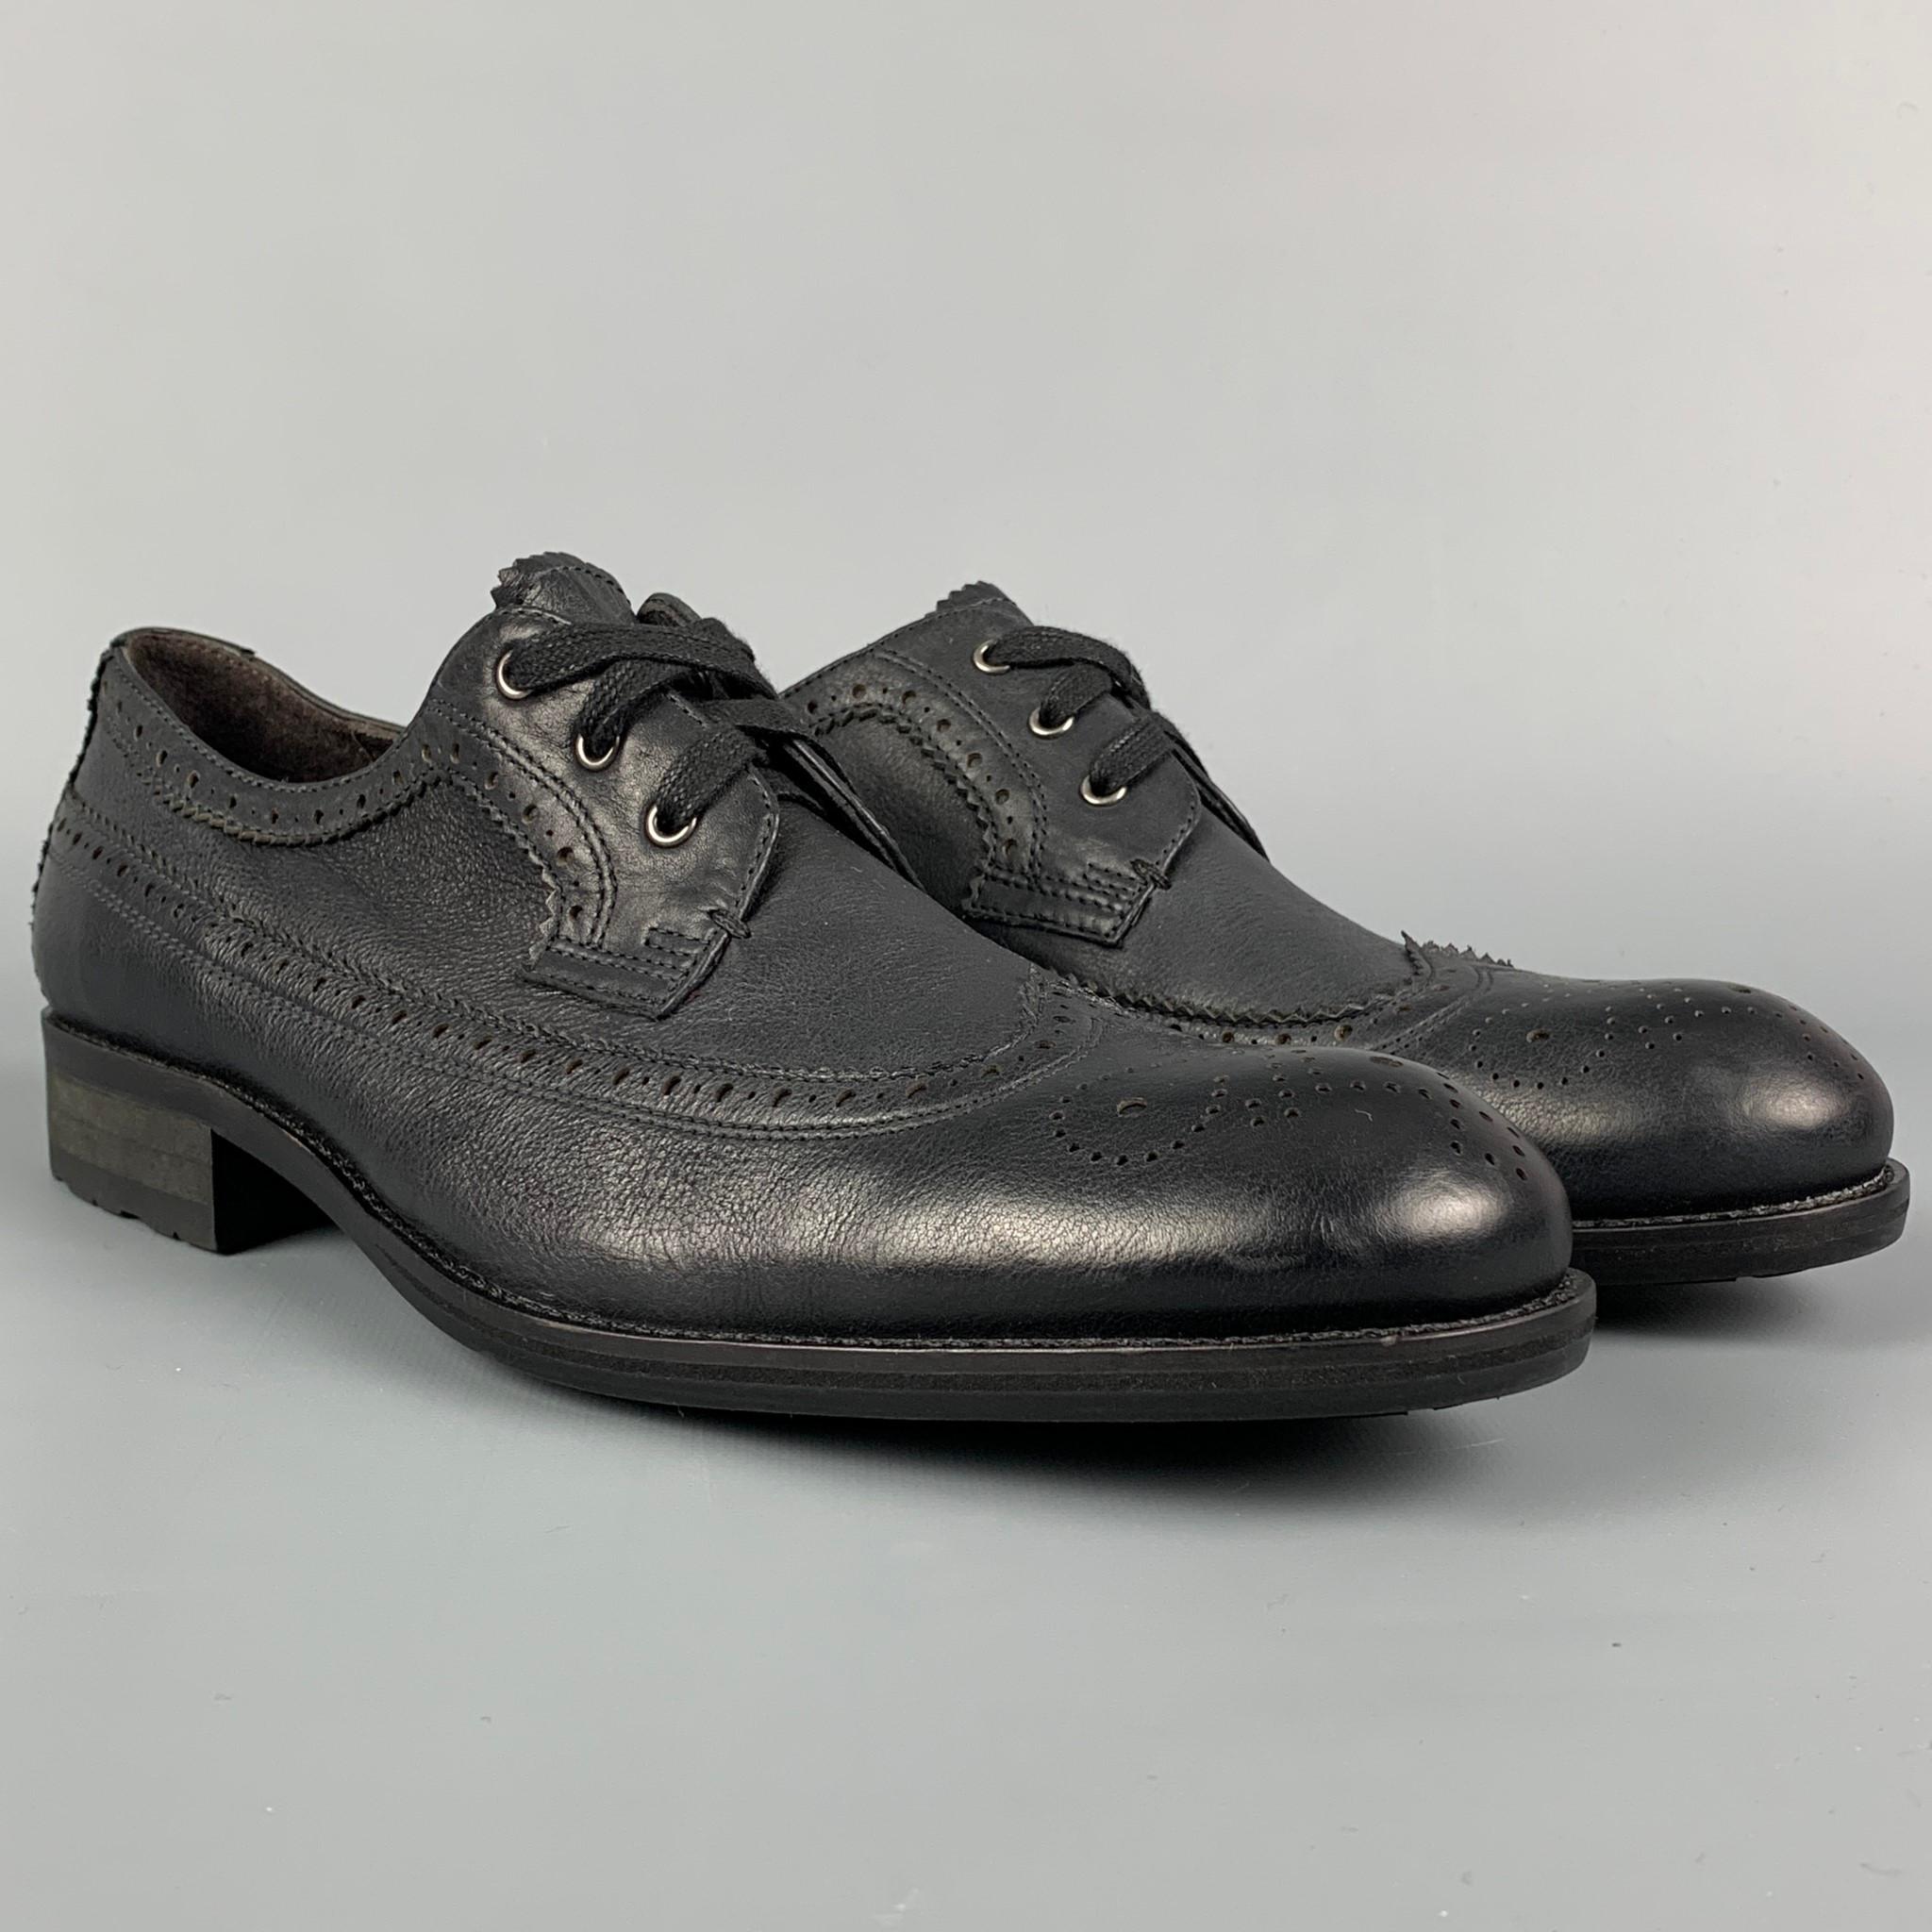 JOHN VARVATOS *U.S.A. shoes comes in a black perforated leather featuring a wingtip style, rubber sole, and a lace up closure. 

Very Good Pre-Owned Condition.
Marked: 8M

Outsole: 11.25 in. x 3.5 in. 